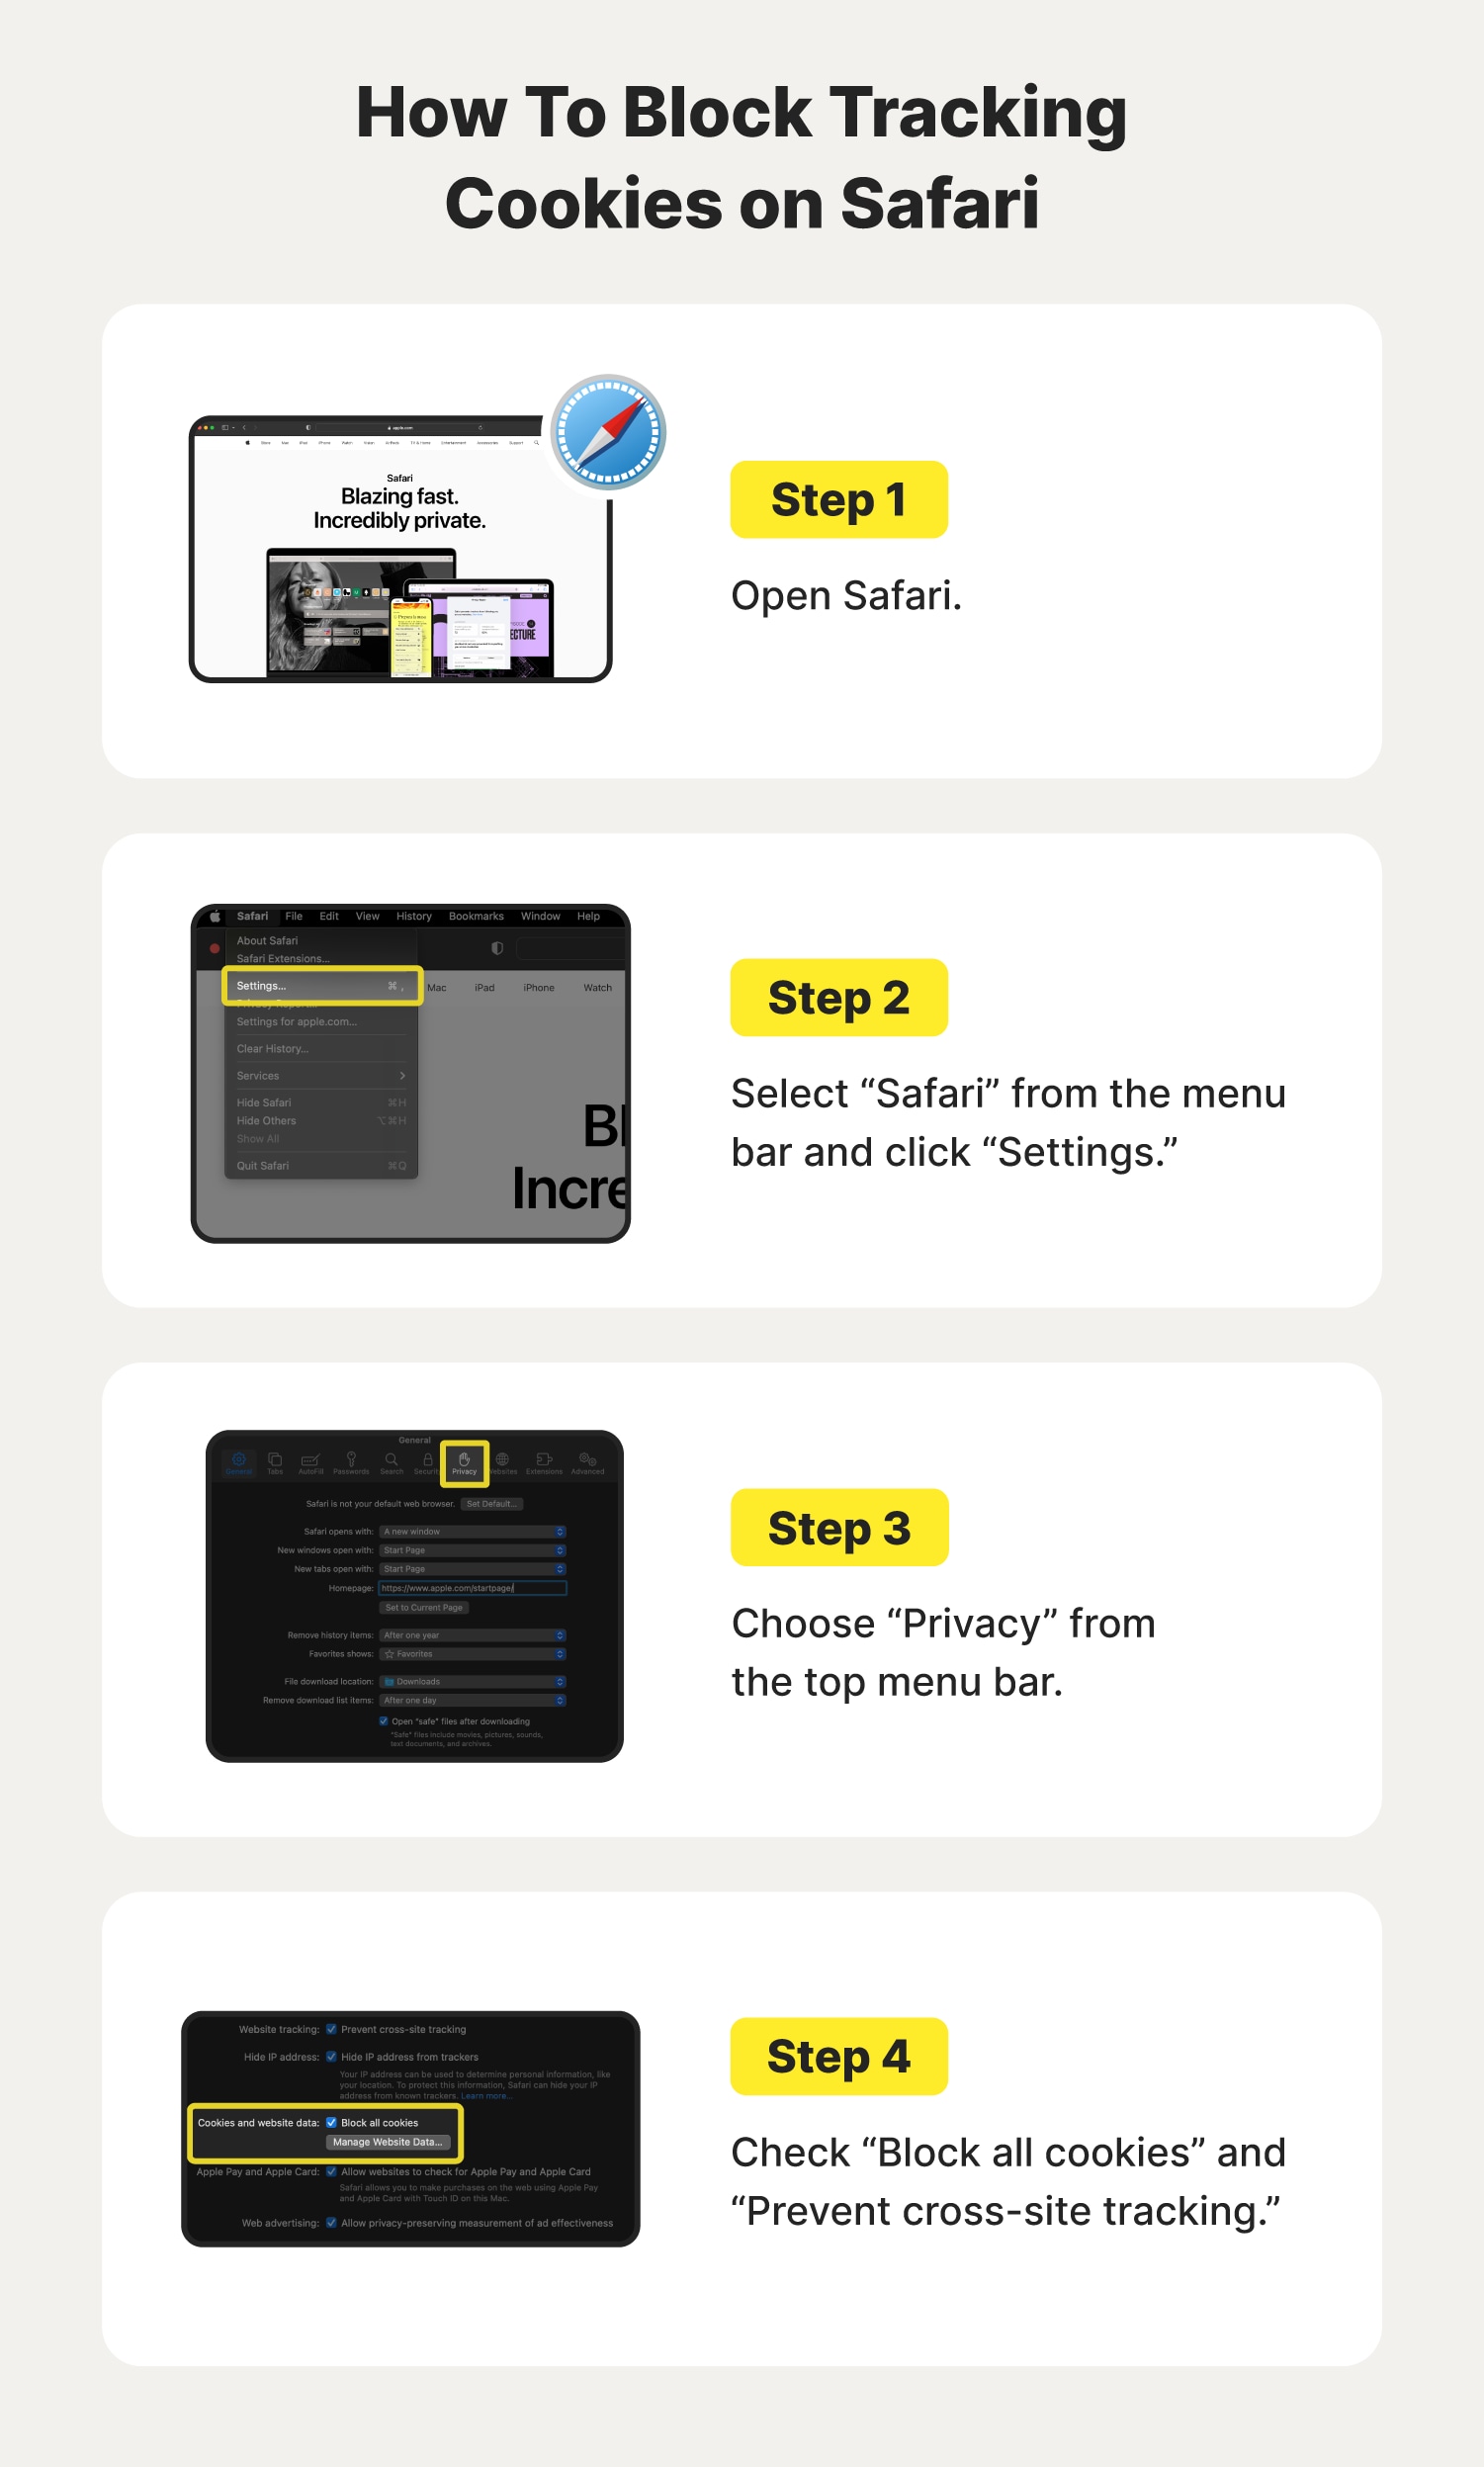 A graphic showcases how to block tracking cookies on Safari.